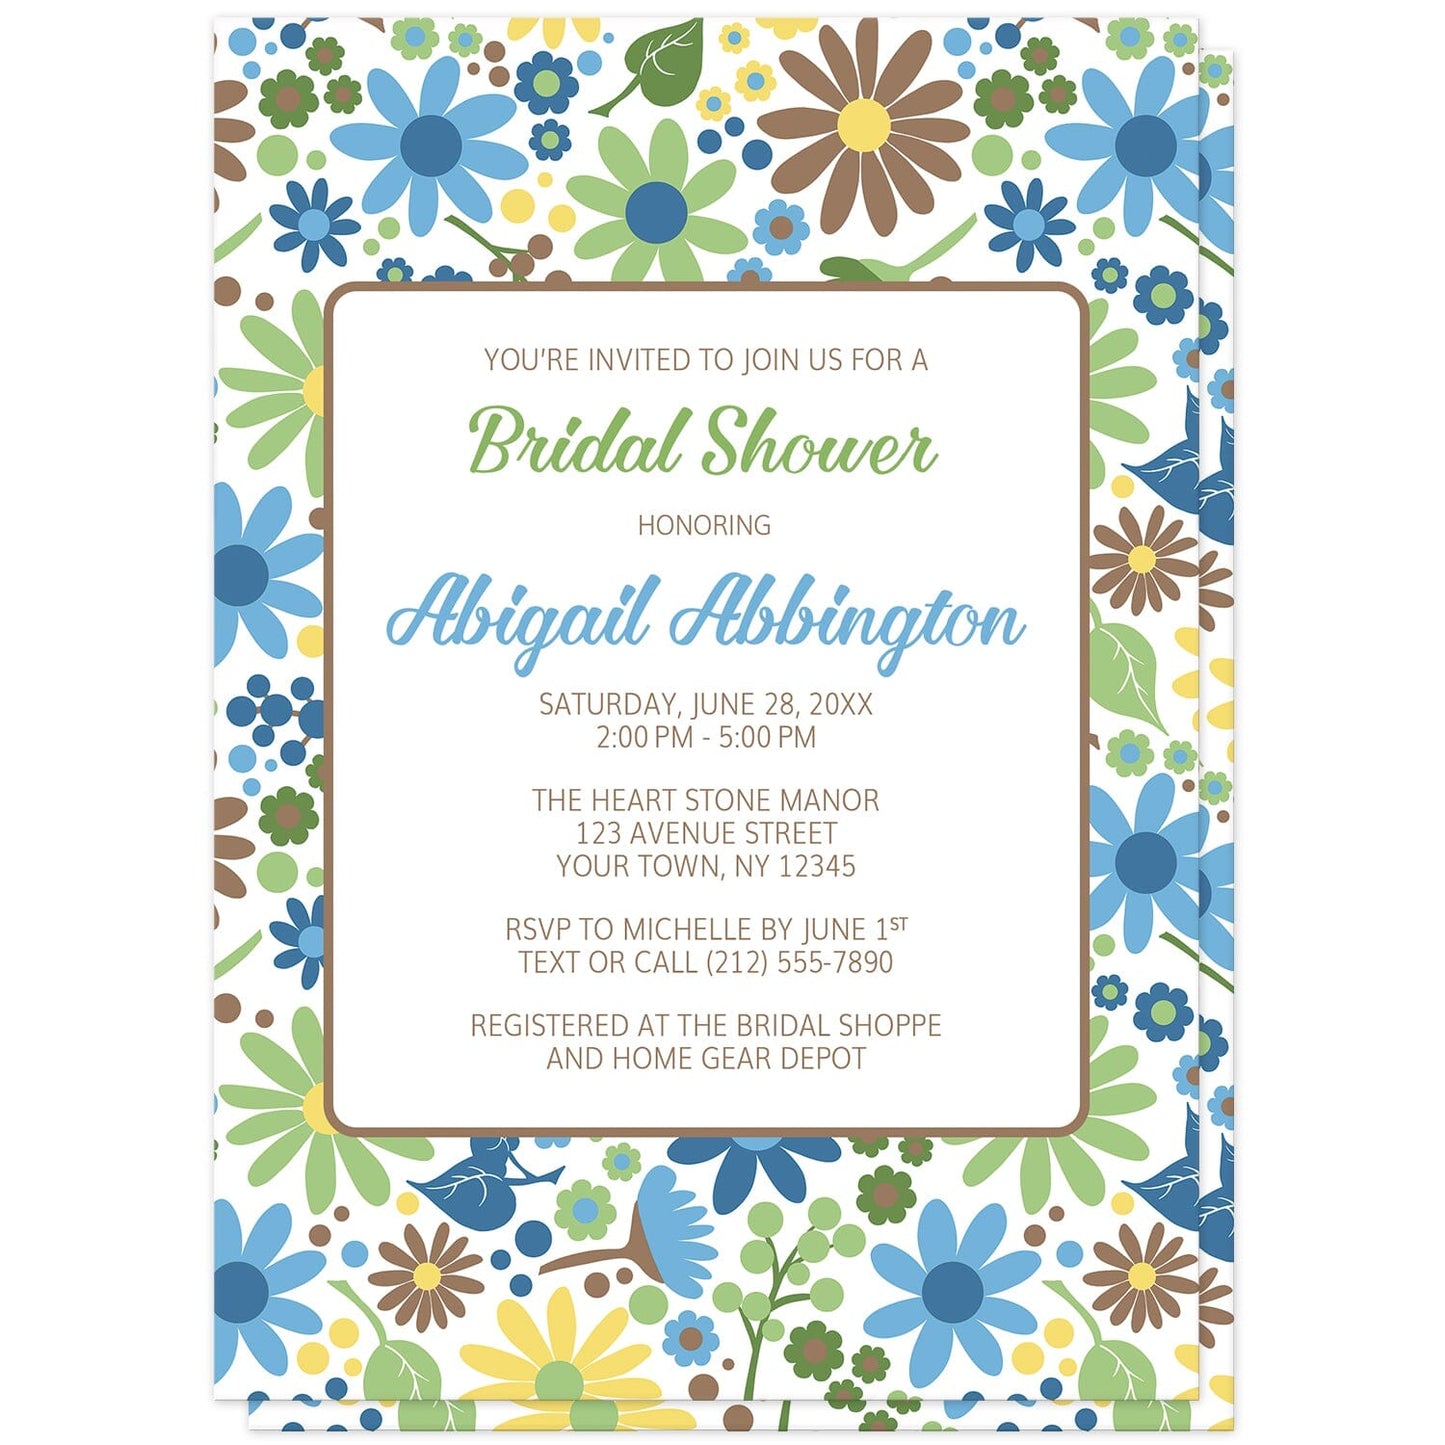 Sunny Summer Flowers Bridal Shower Invitations at Artistically Invited. Invitations designed with your personalized bridal shower details custom printed in green, blue, and brown inside a white rectangular area outlined in brown, over a sunny summer pattern of wildflowers. These floral bridal shower invitations are perfect for your summer bridal shower celebrations when the bride-to-be loves flowers and wildflowers, and pretty floral designs.